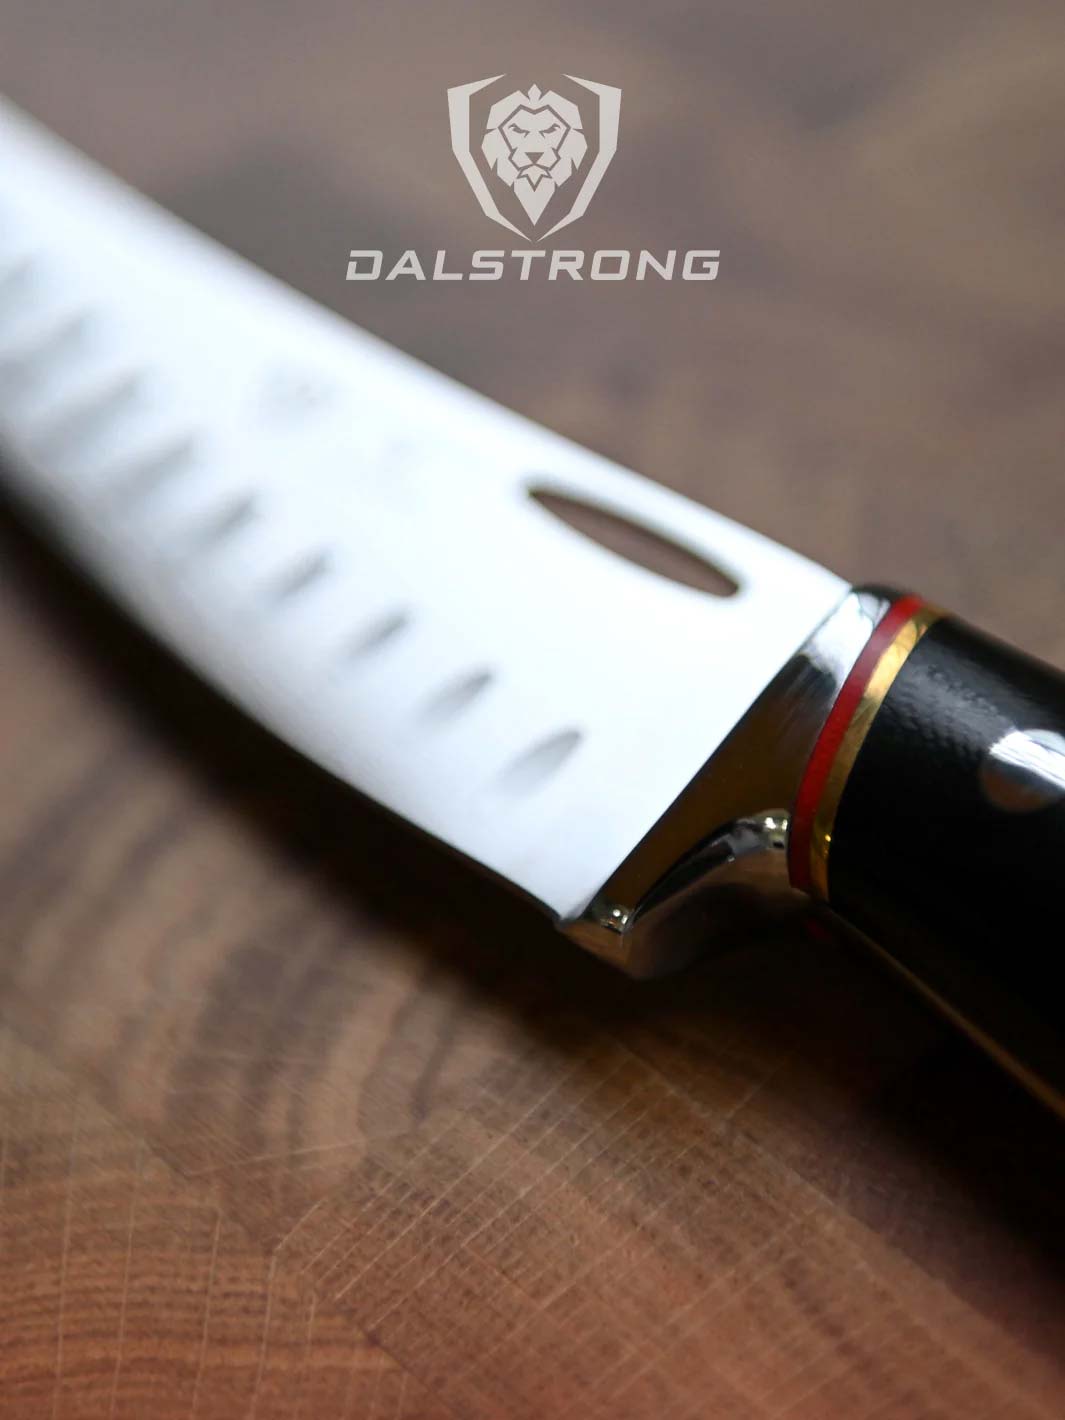 Dalstrong centurion series 6 inch curved boning knife on a cutting board.